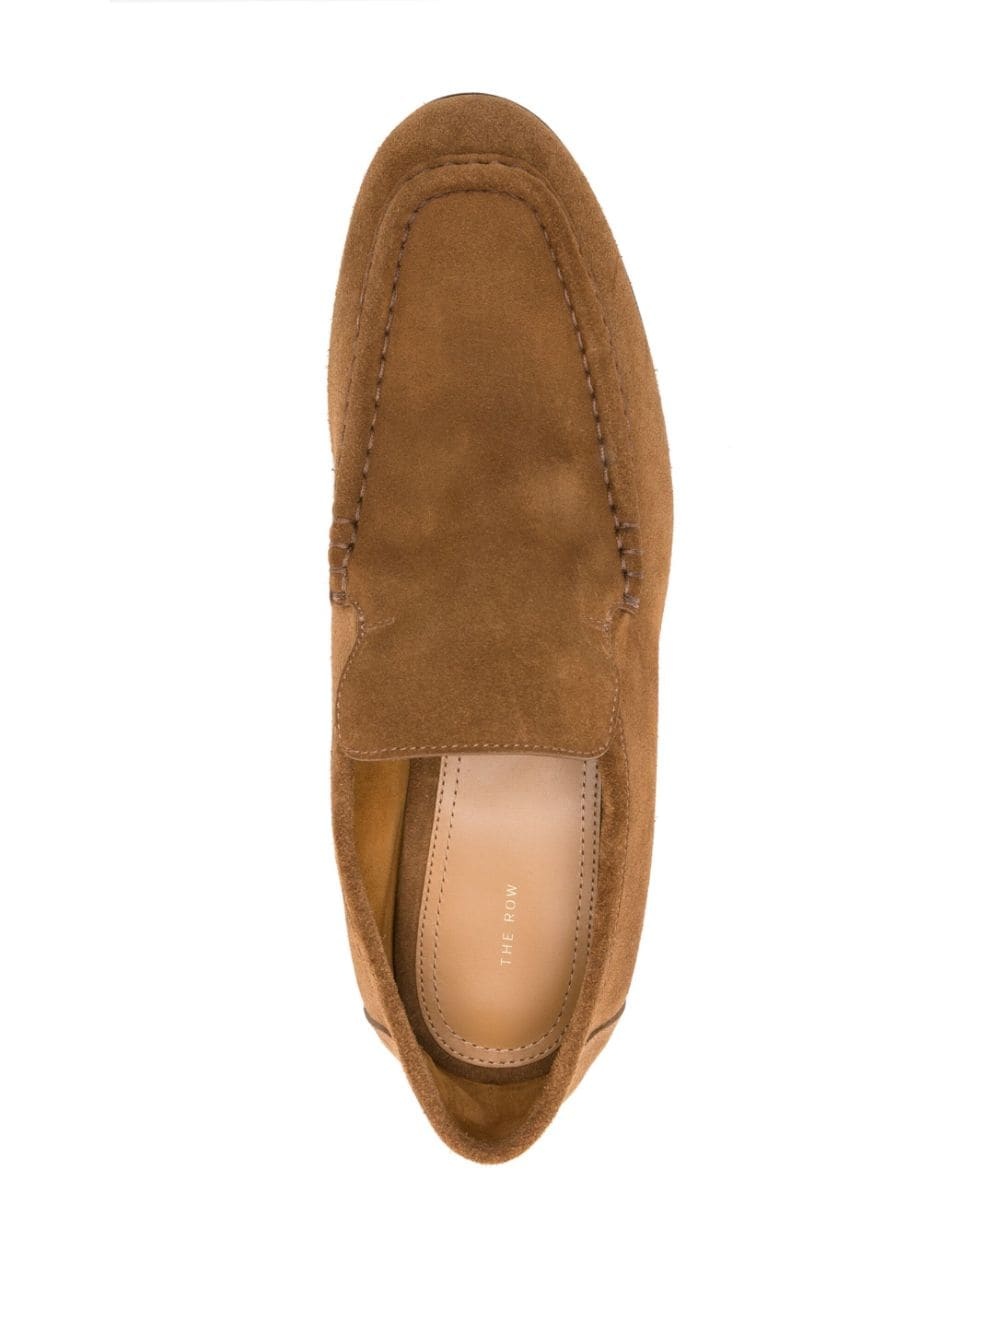 New Soft suede loafers - 4